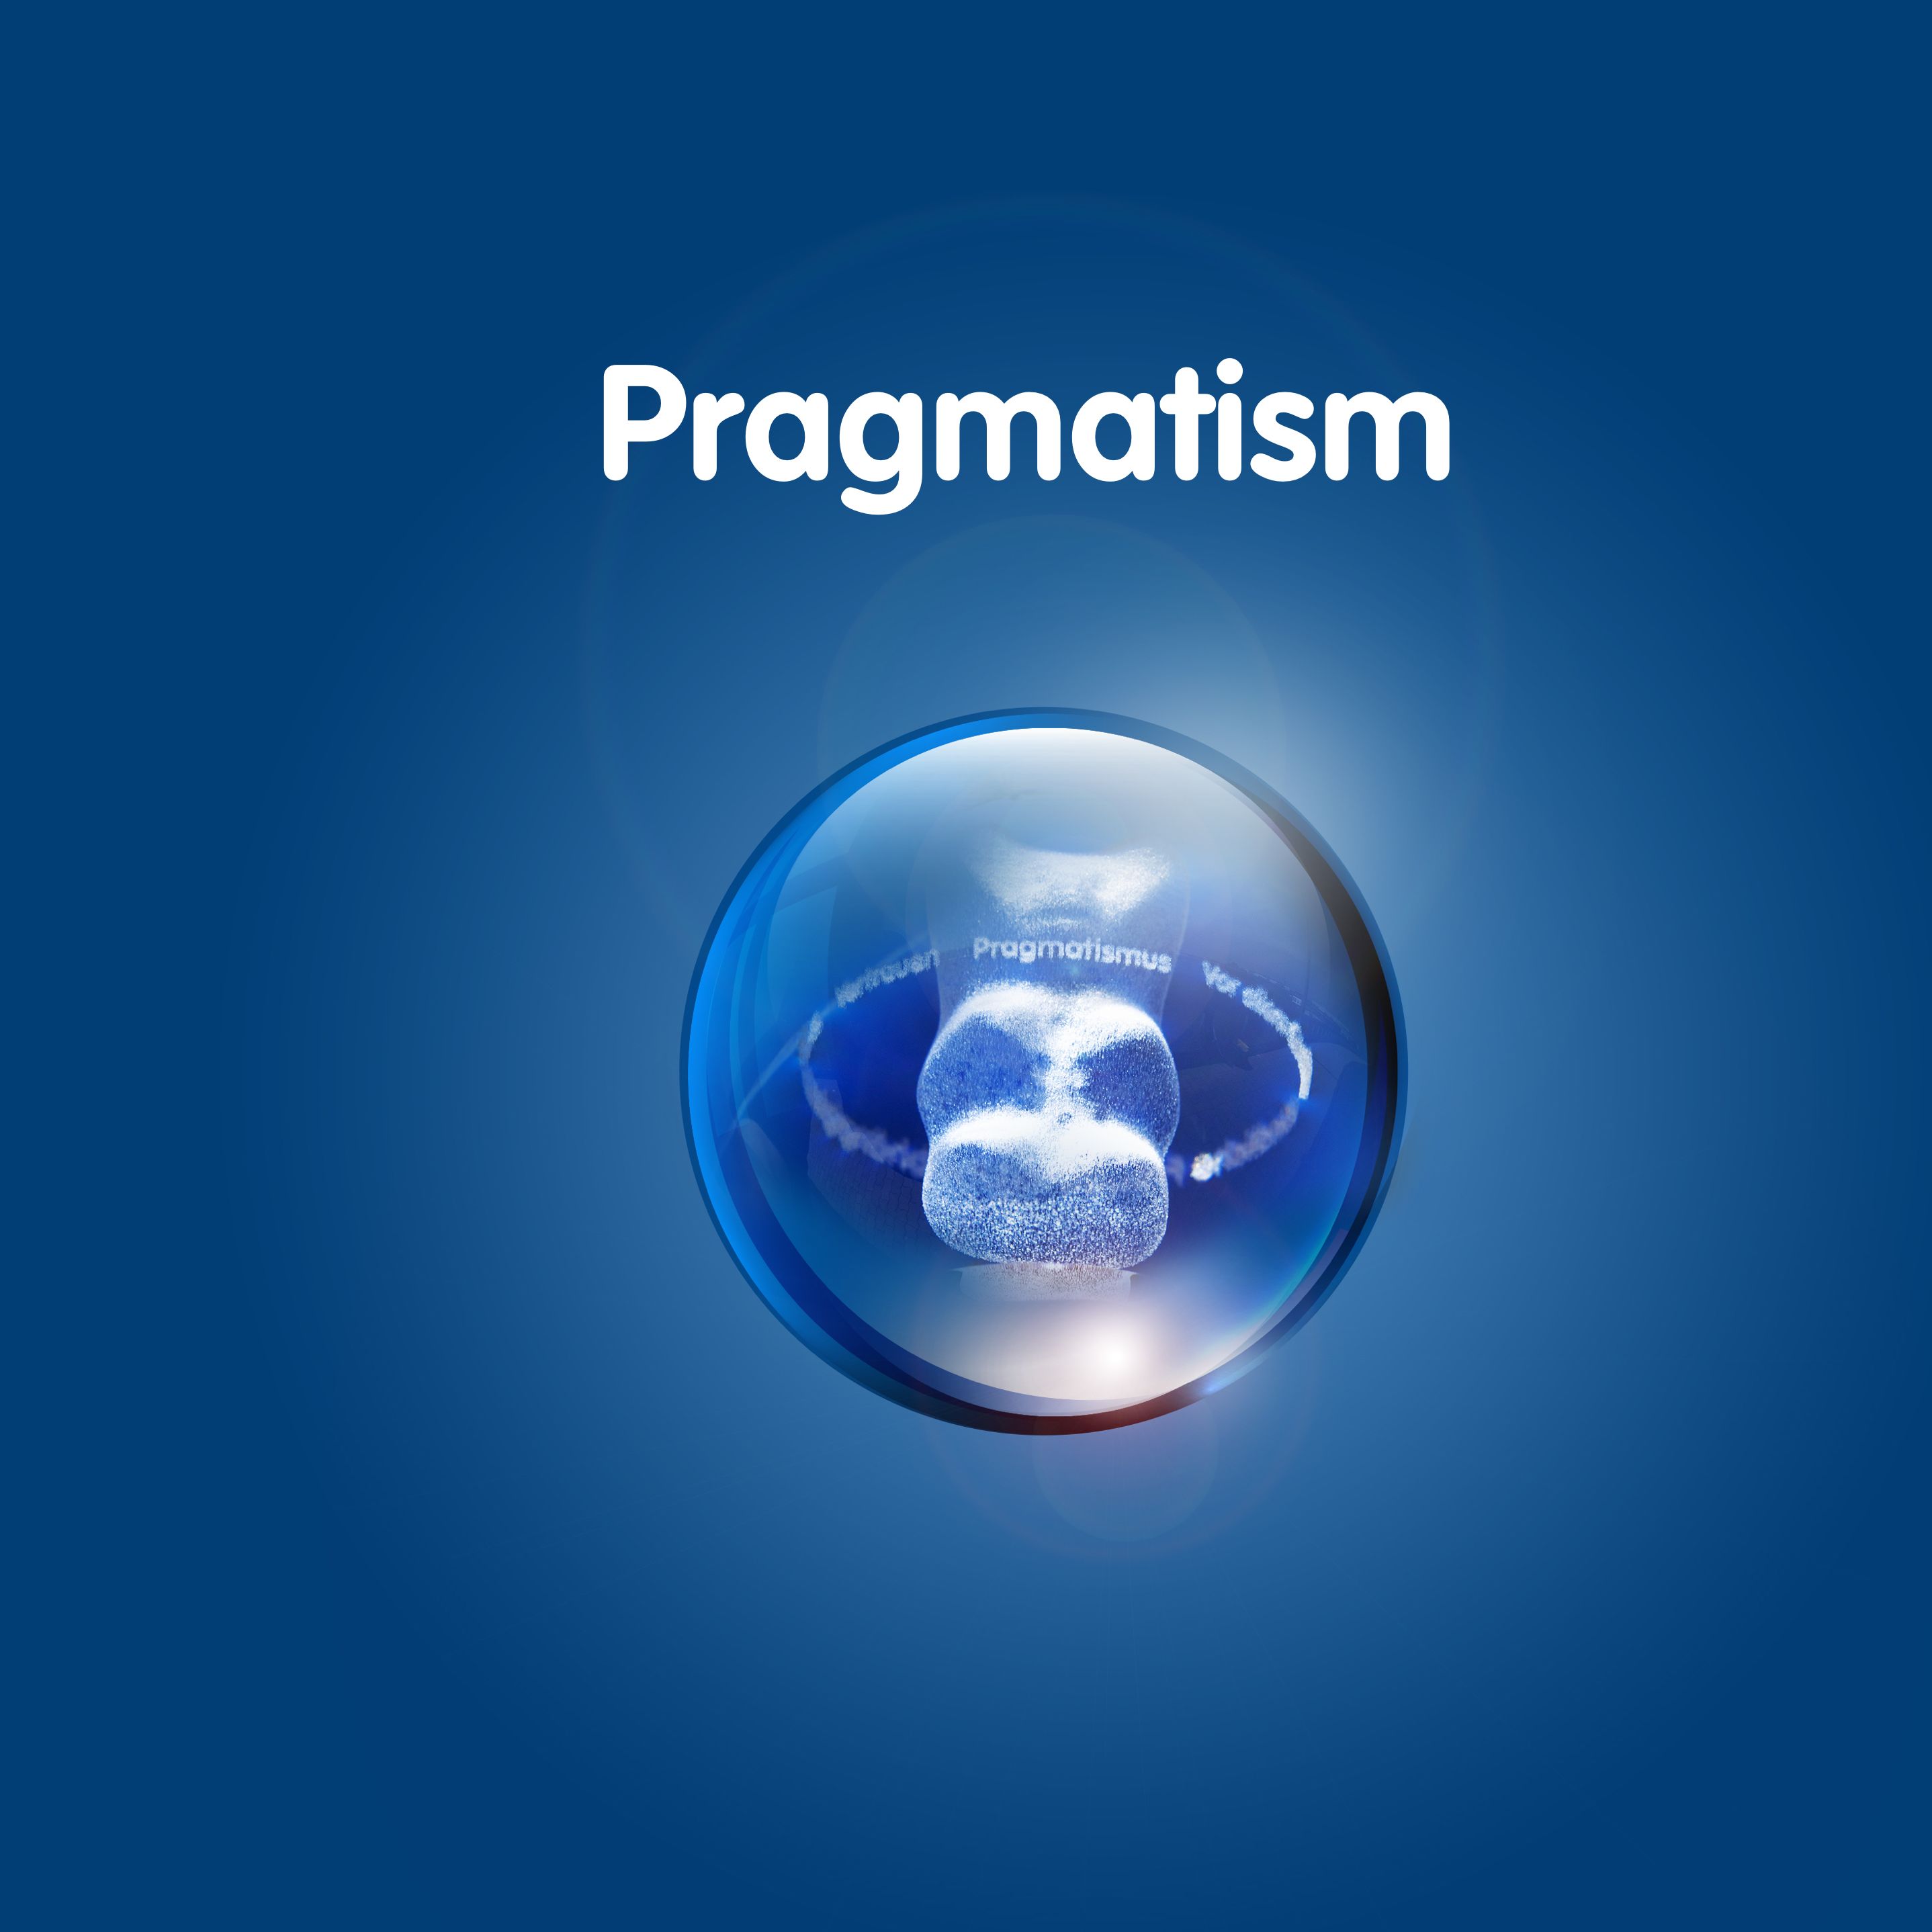 Graphic with Goldbear in transparent ball against dark-blue background with text: ‘Pragmatism’